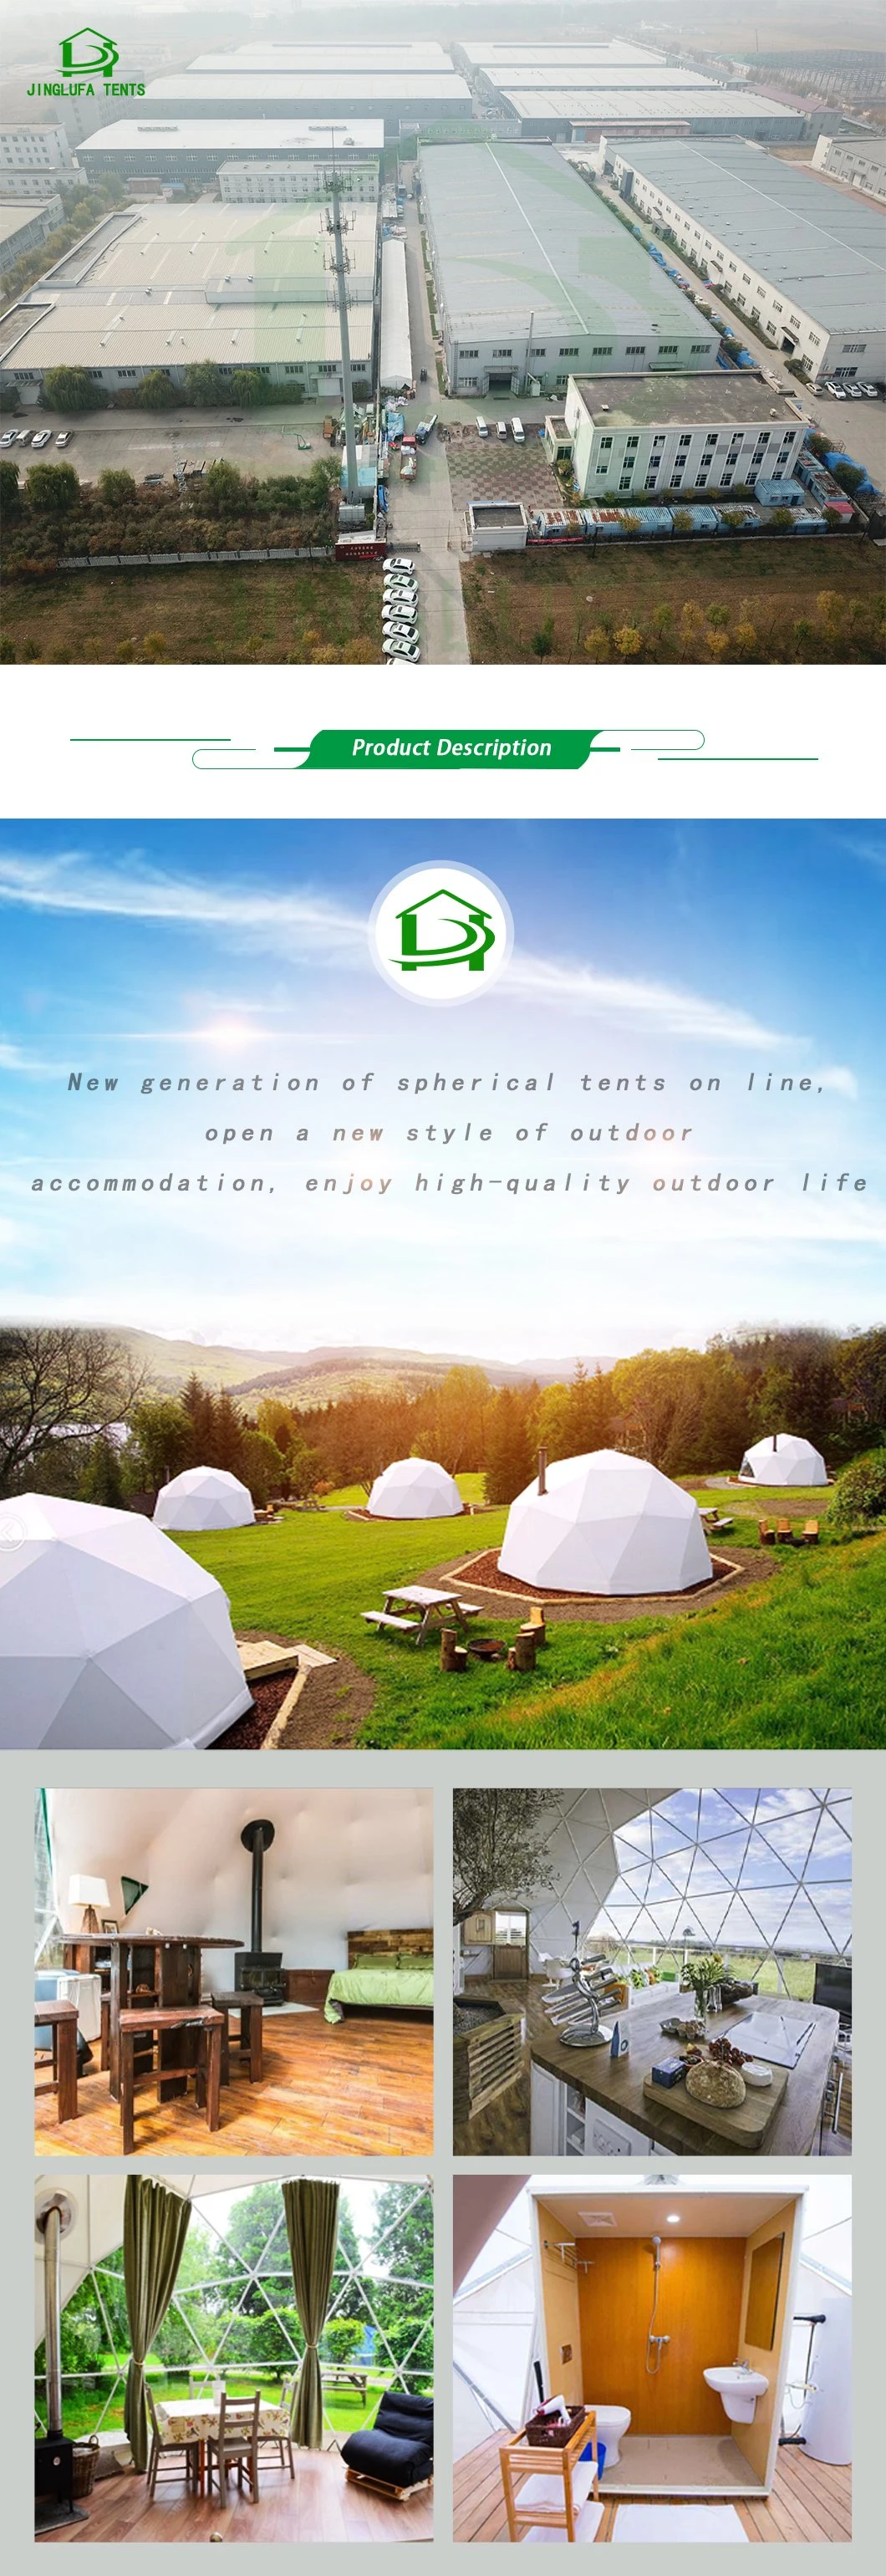 Luxury Glamping PVC Geodesic Dome Tent for Outdoor Glamping